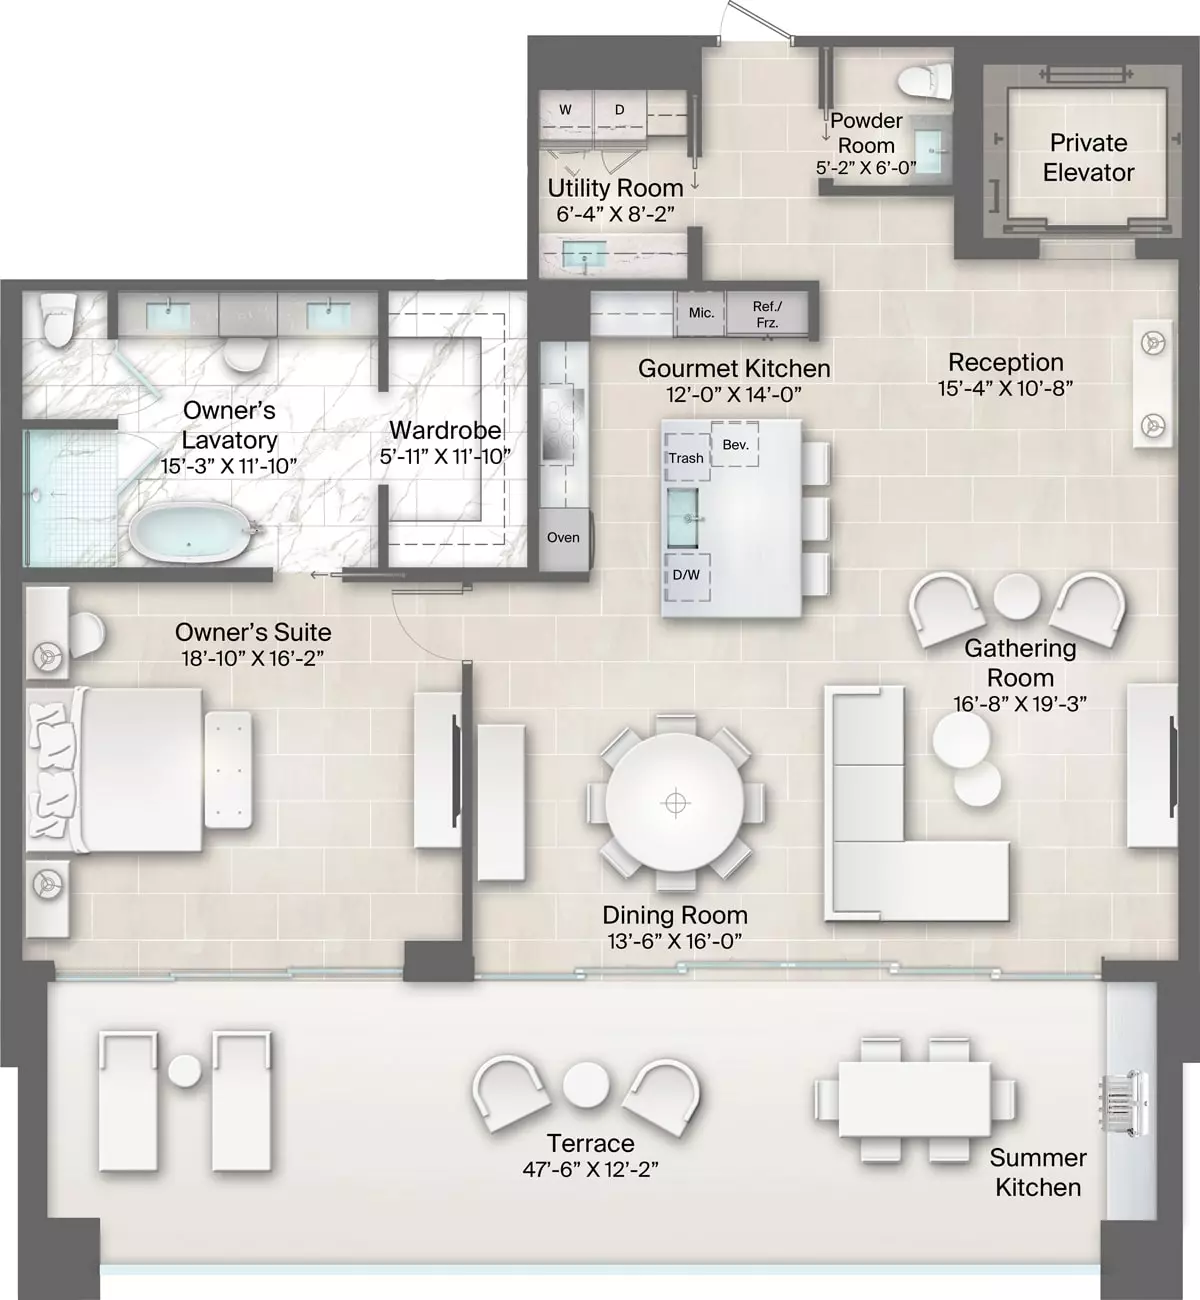 Bateau Building, Plan 7 Floorplan includes 1 bedroom, 1.5 baths and a terrace with a bay/garden view